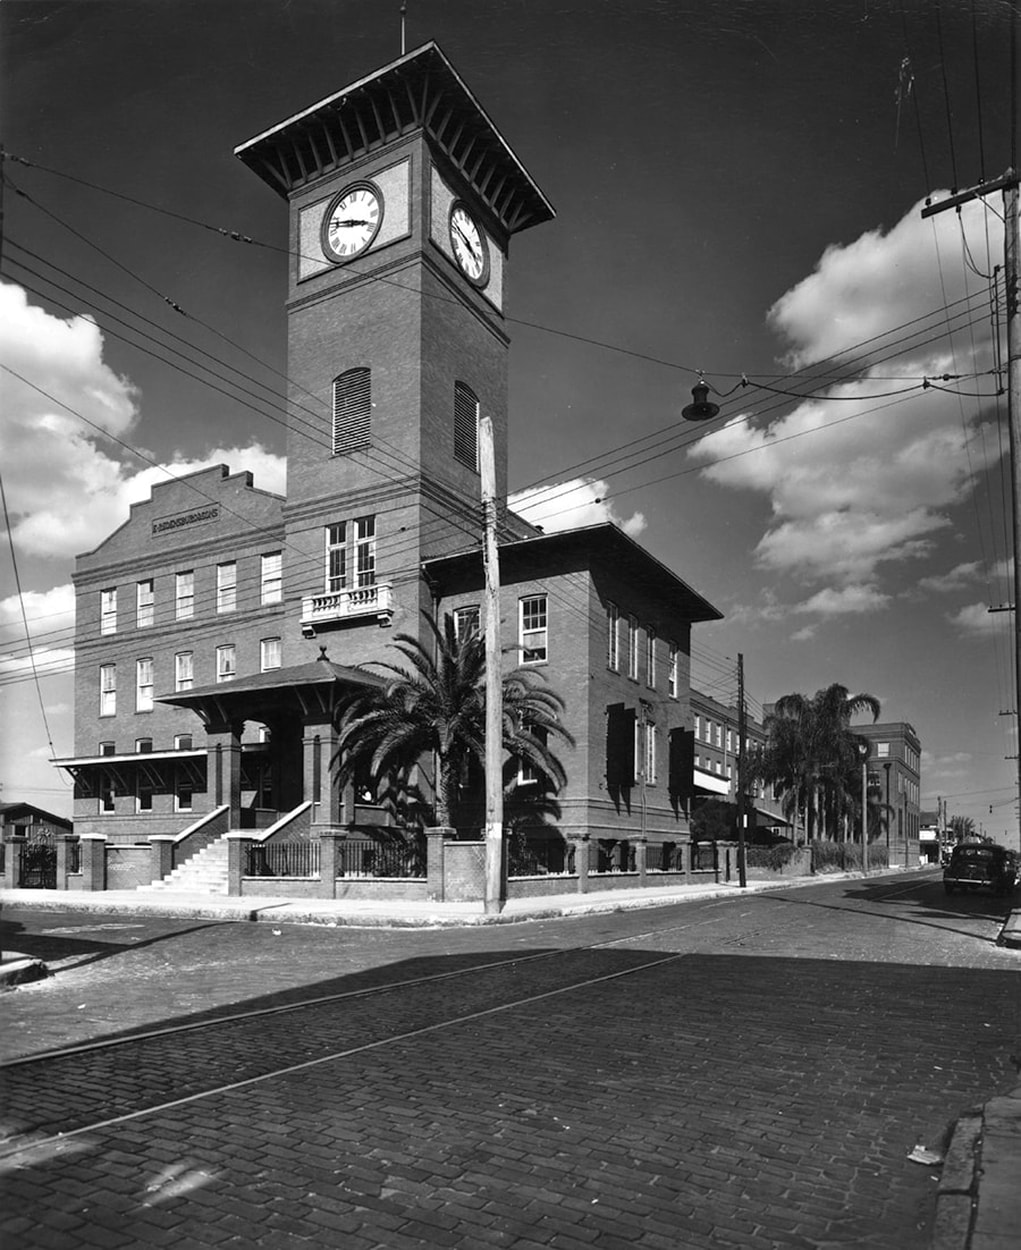 Regensburg Cigar Factory, now known as the J.C. Newman Cigar Company